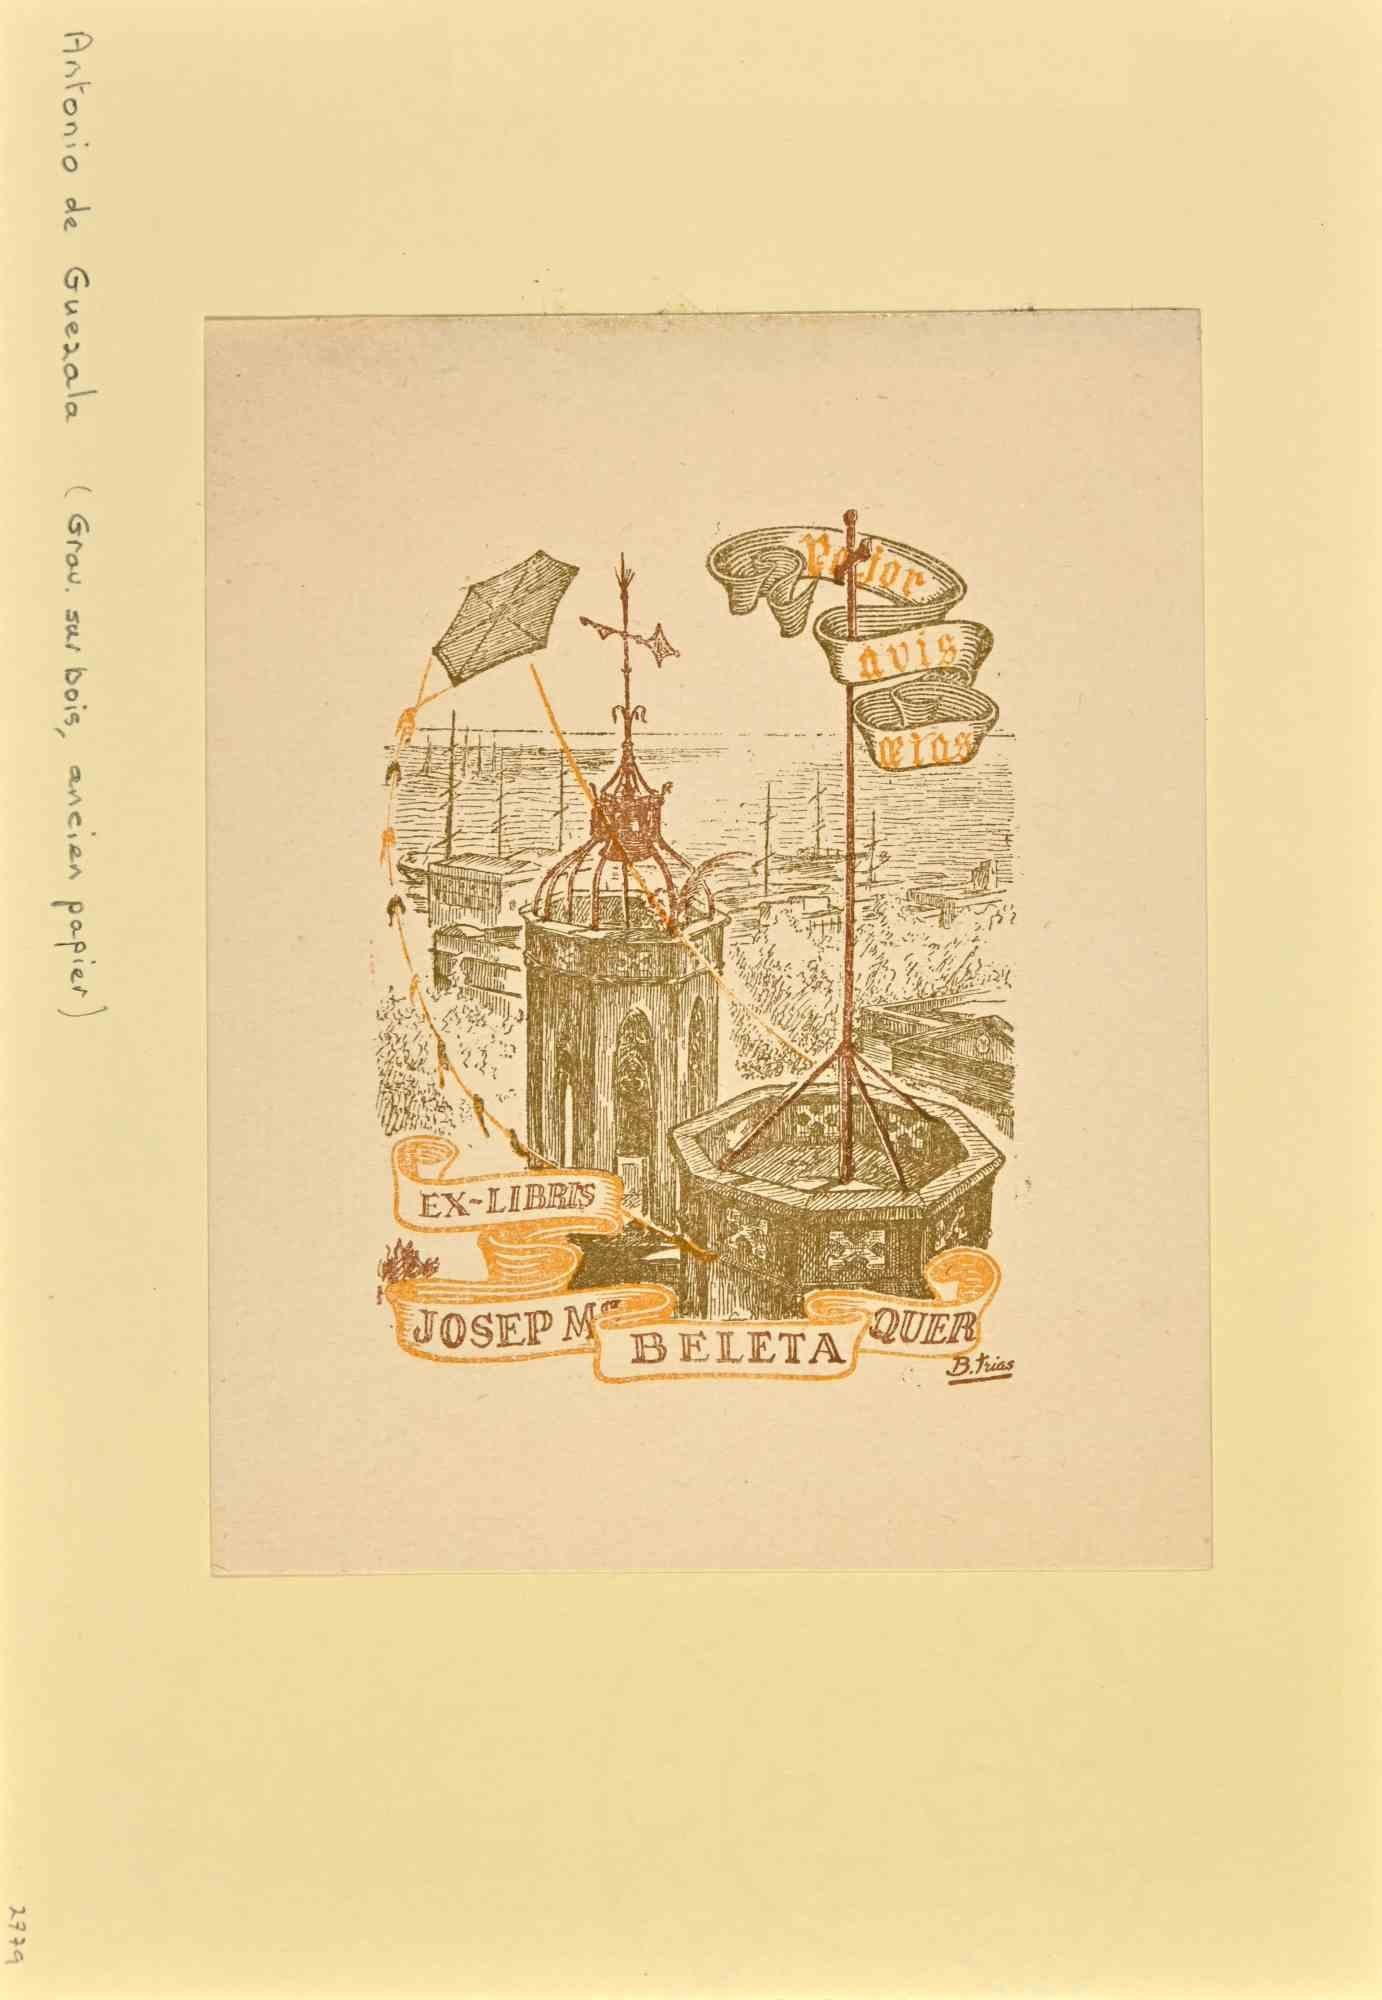 Ex Libris Josep Beleta Quer is an Artwork realized by the Spanish artist Antonio de Guezala (1889-1956).

Woodcut coloured print on ivory paper. The work is glued on cardboard. 

Total dimensions: 21 x 14.5 cm.

In excellent conditions.

The artwork